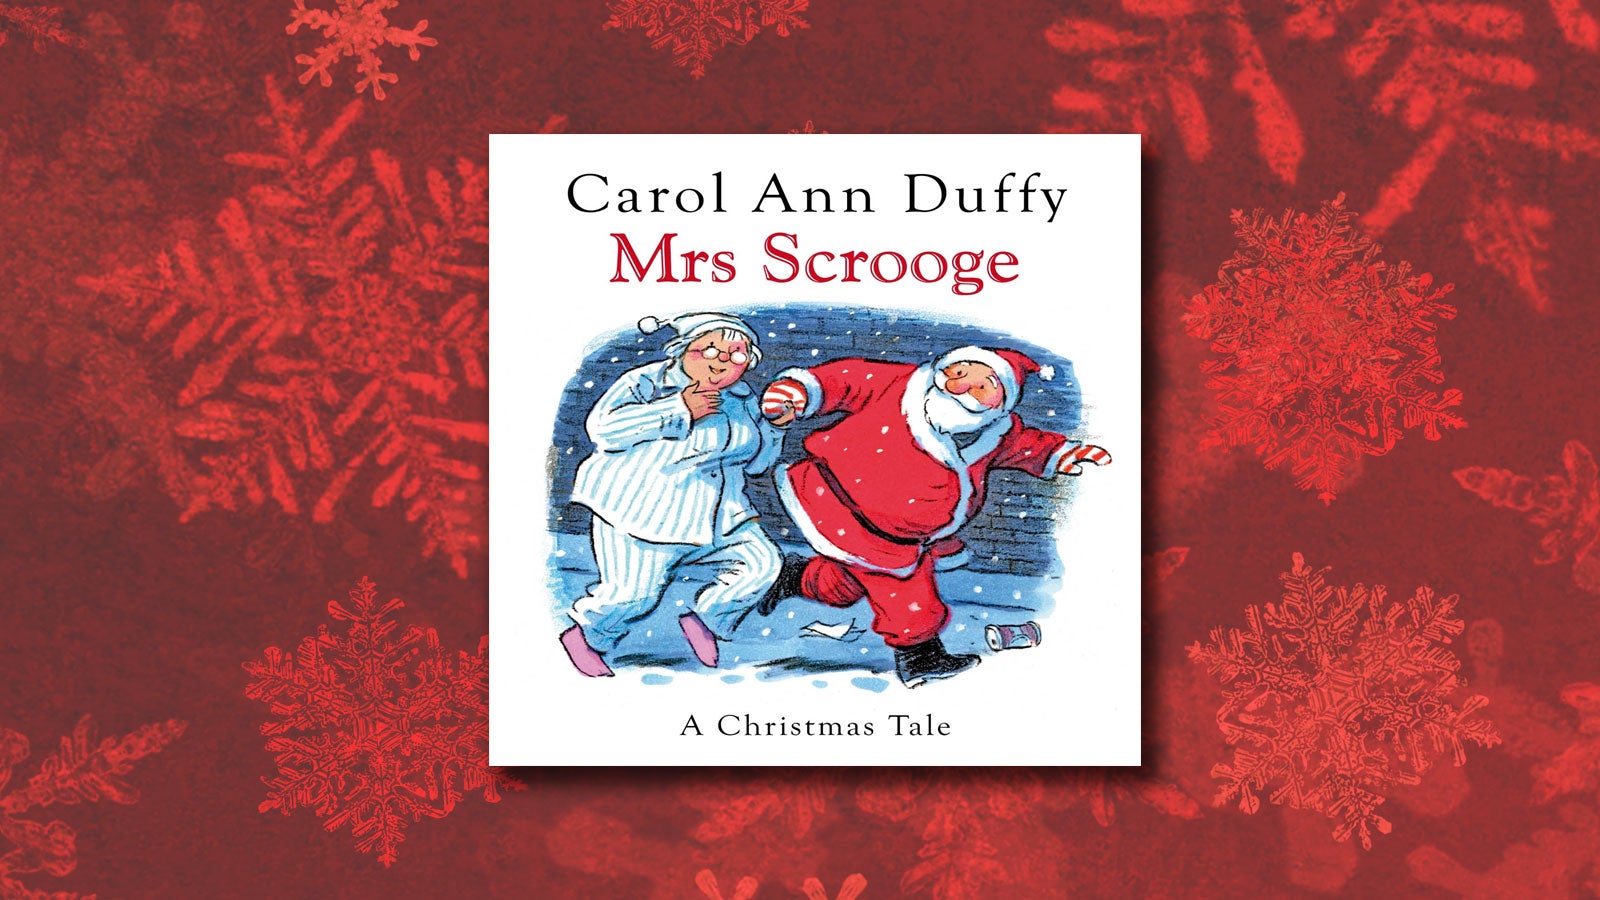 Mrs Scrooge book cover on a red Christmas background.